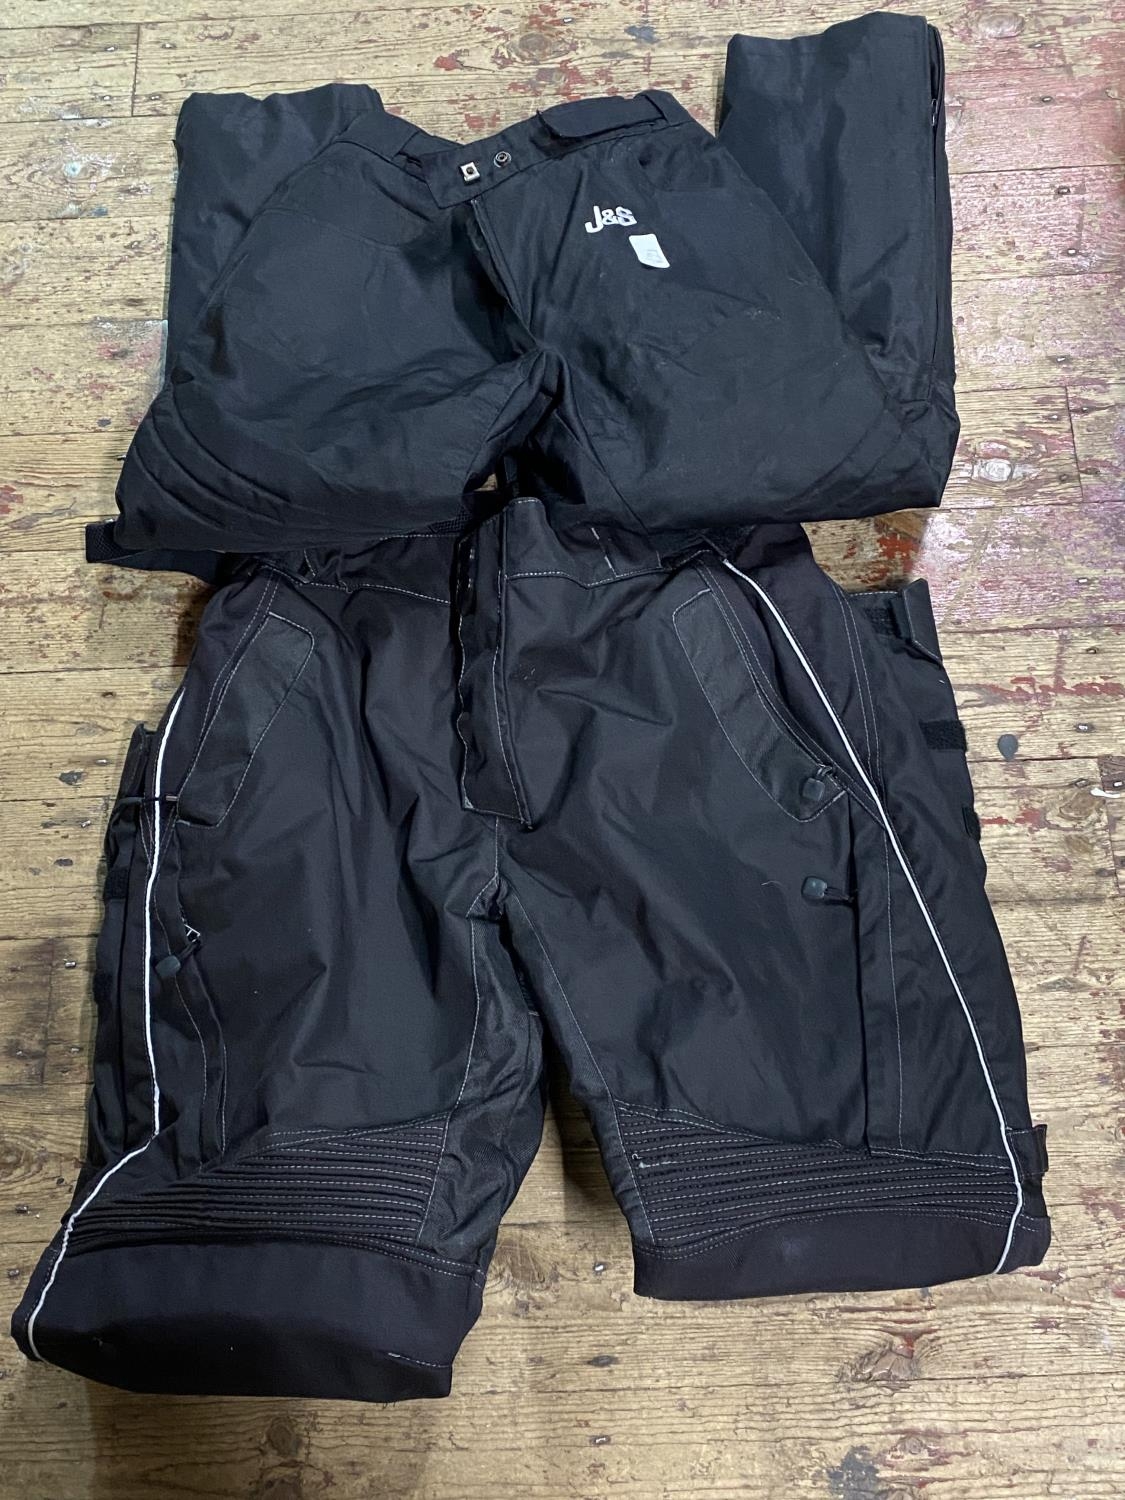 Two pairs of motorbike trousers